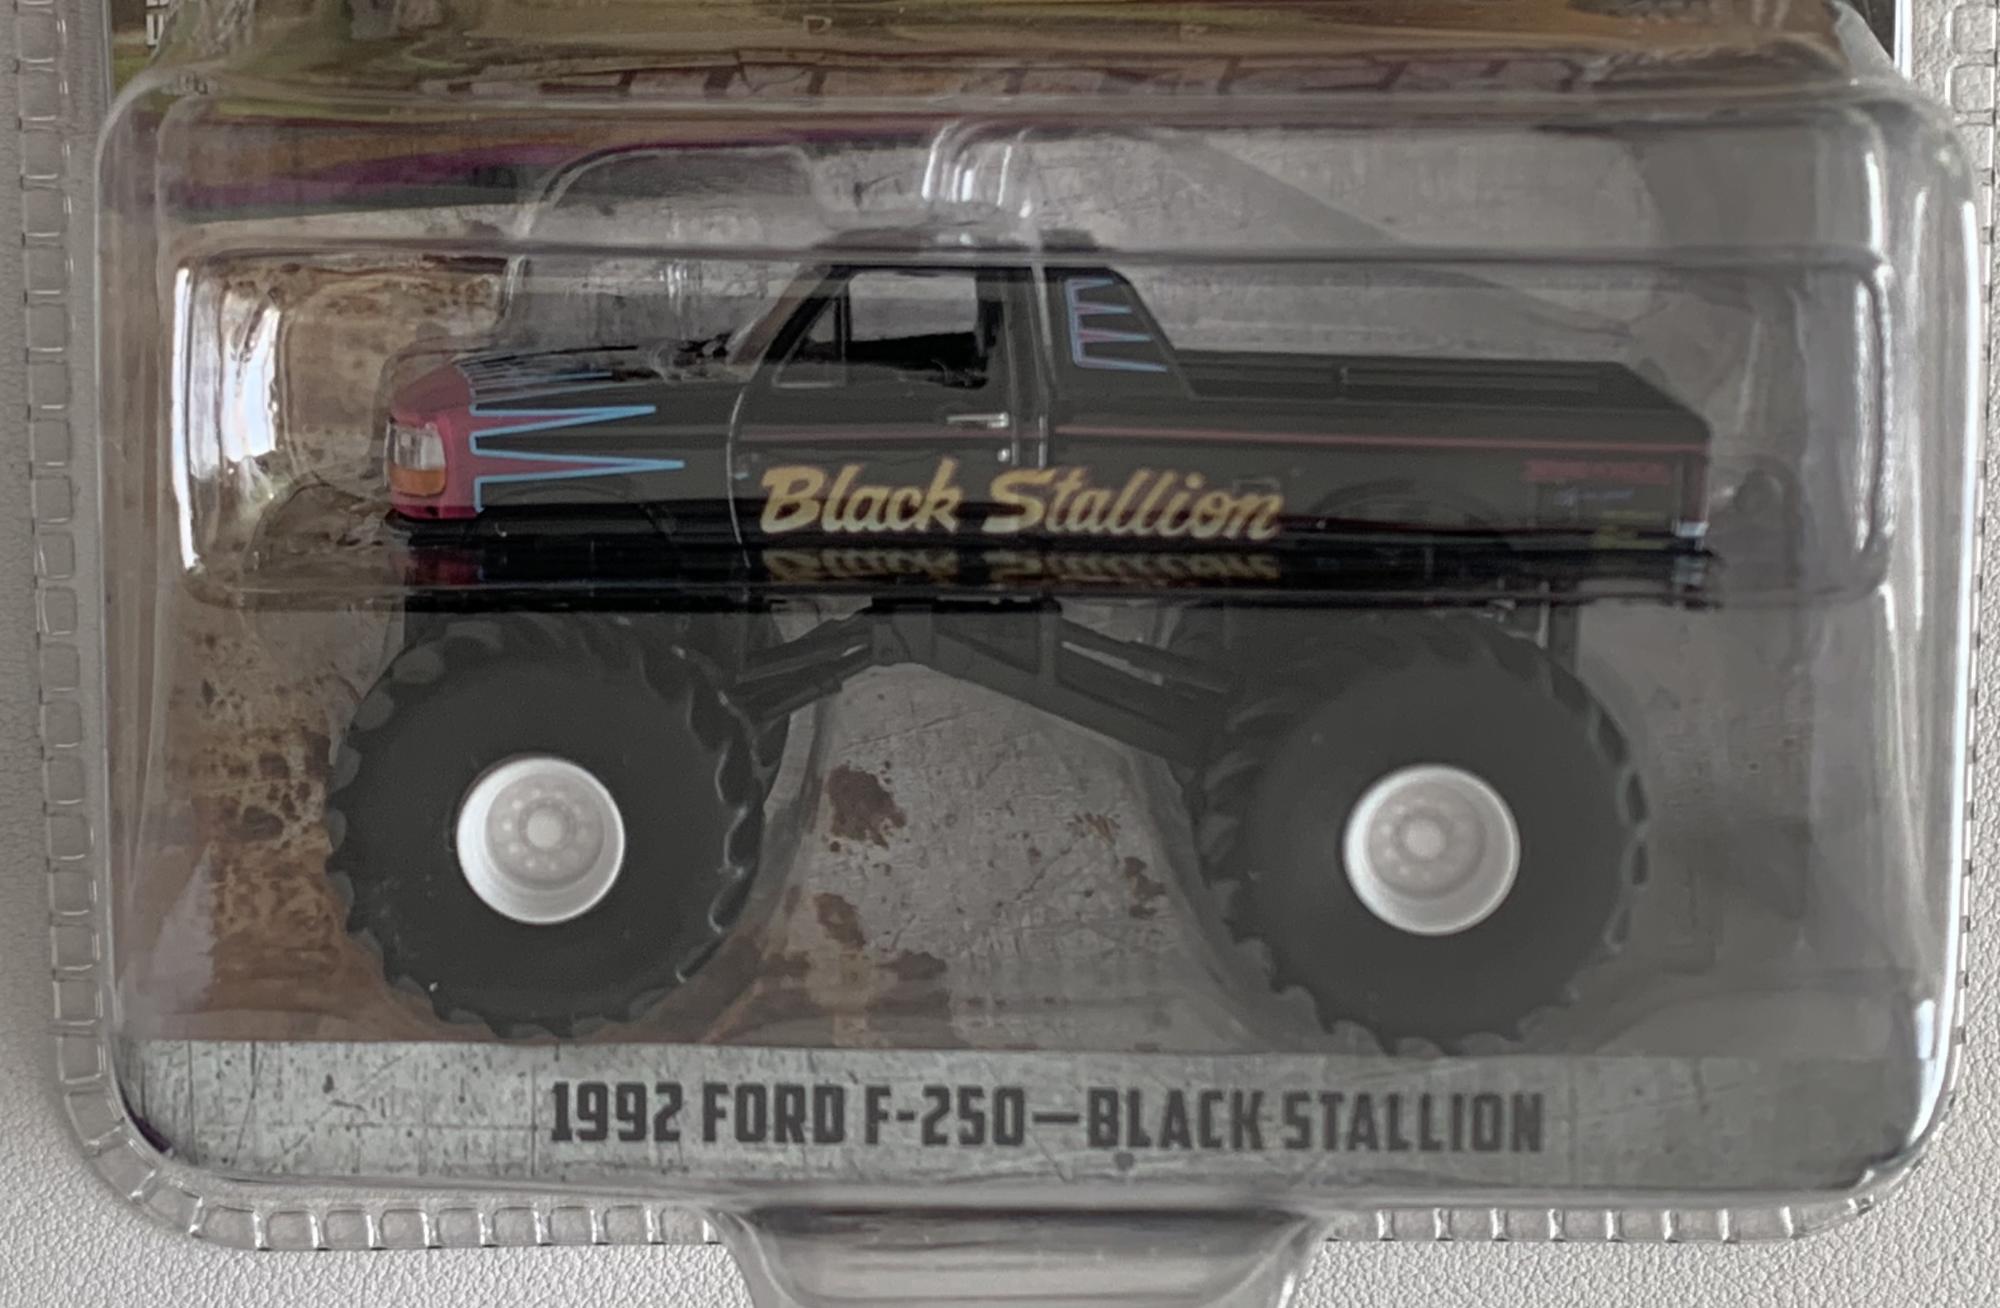 Kings of Crunch Monster Truck series 11, 1992 Ford F-250 Black Stallion, 1:64 scale diecast model from Greenlight , limited edition model